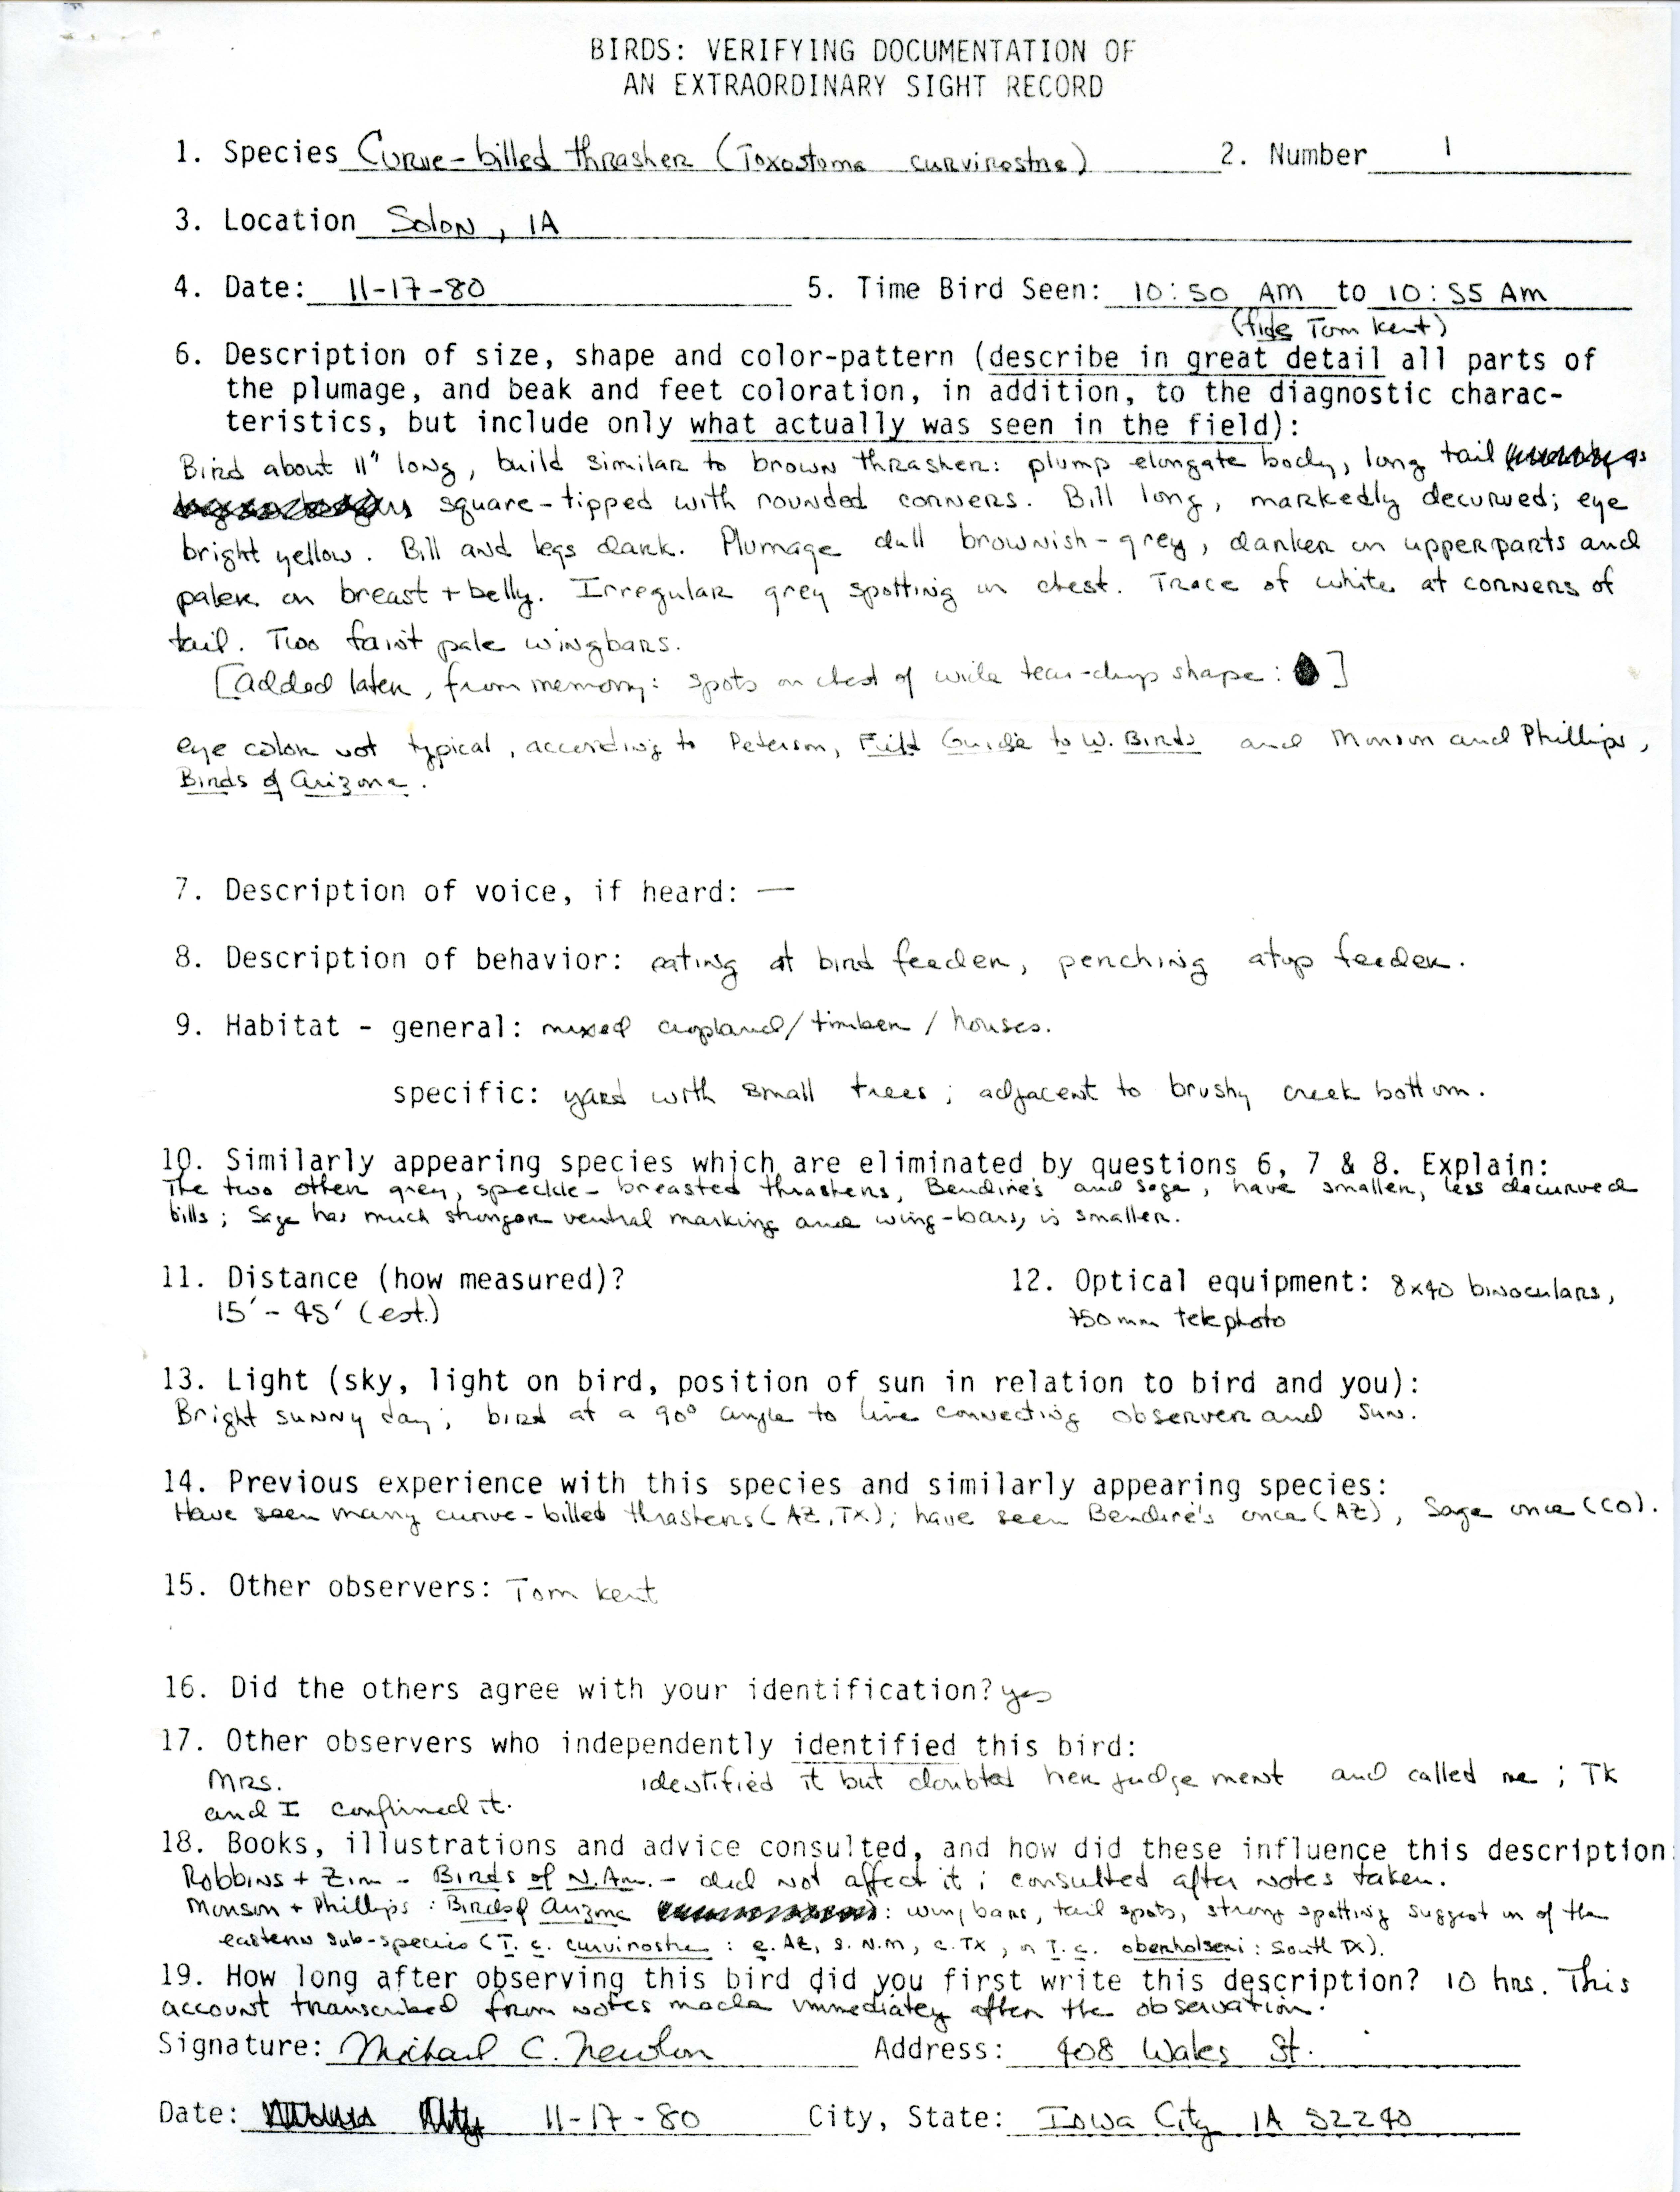 Verifying documentation form for Curve-billed Thrasher sighting submitted by Michael C. Newlon, November 17 1980